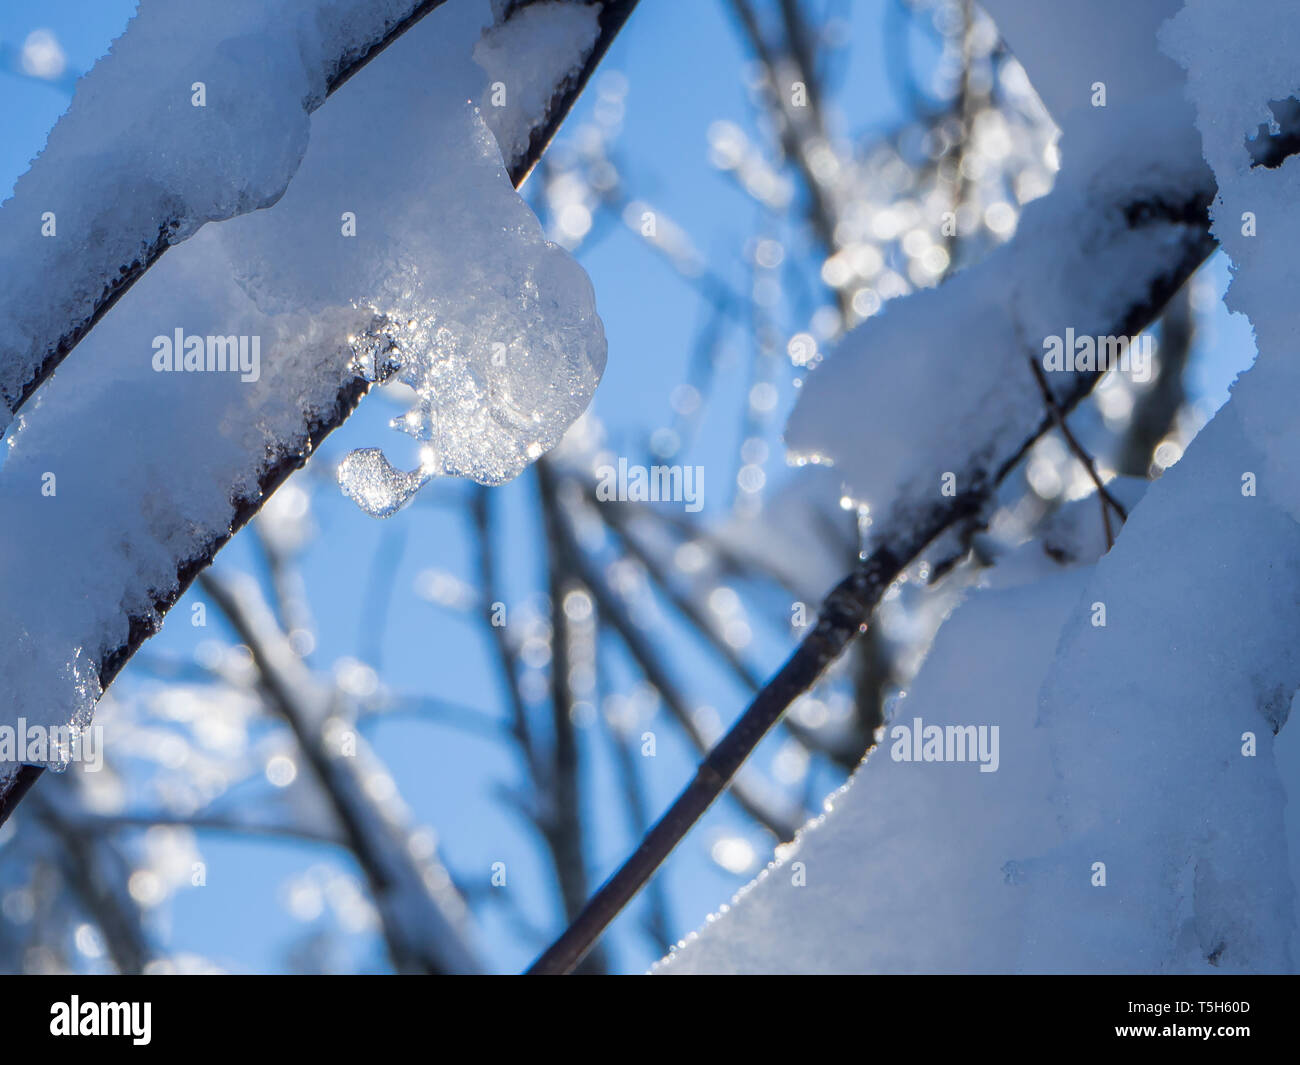 Snow-covered branches and twigs with frozen waterdrops, close-up Stock Photo